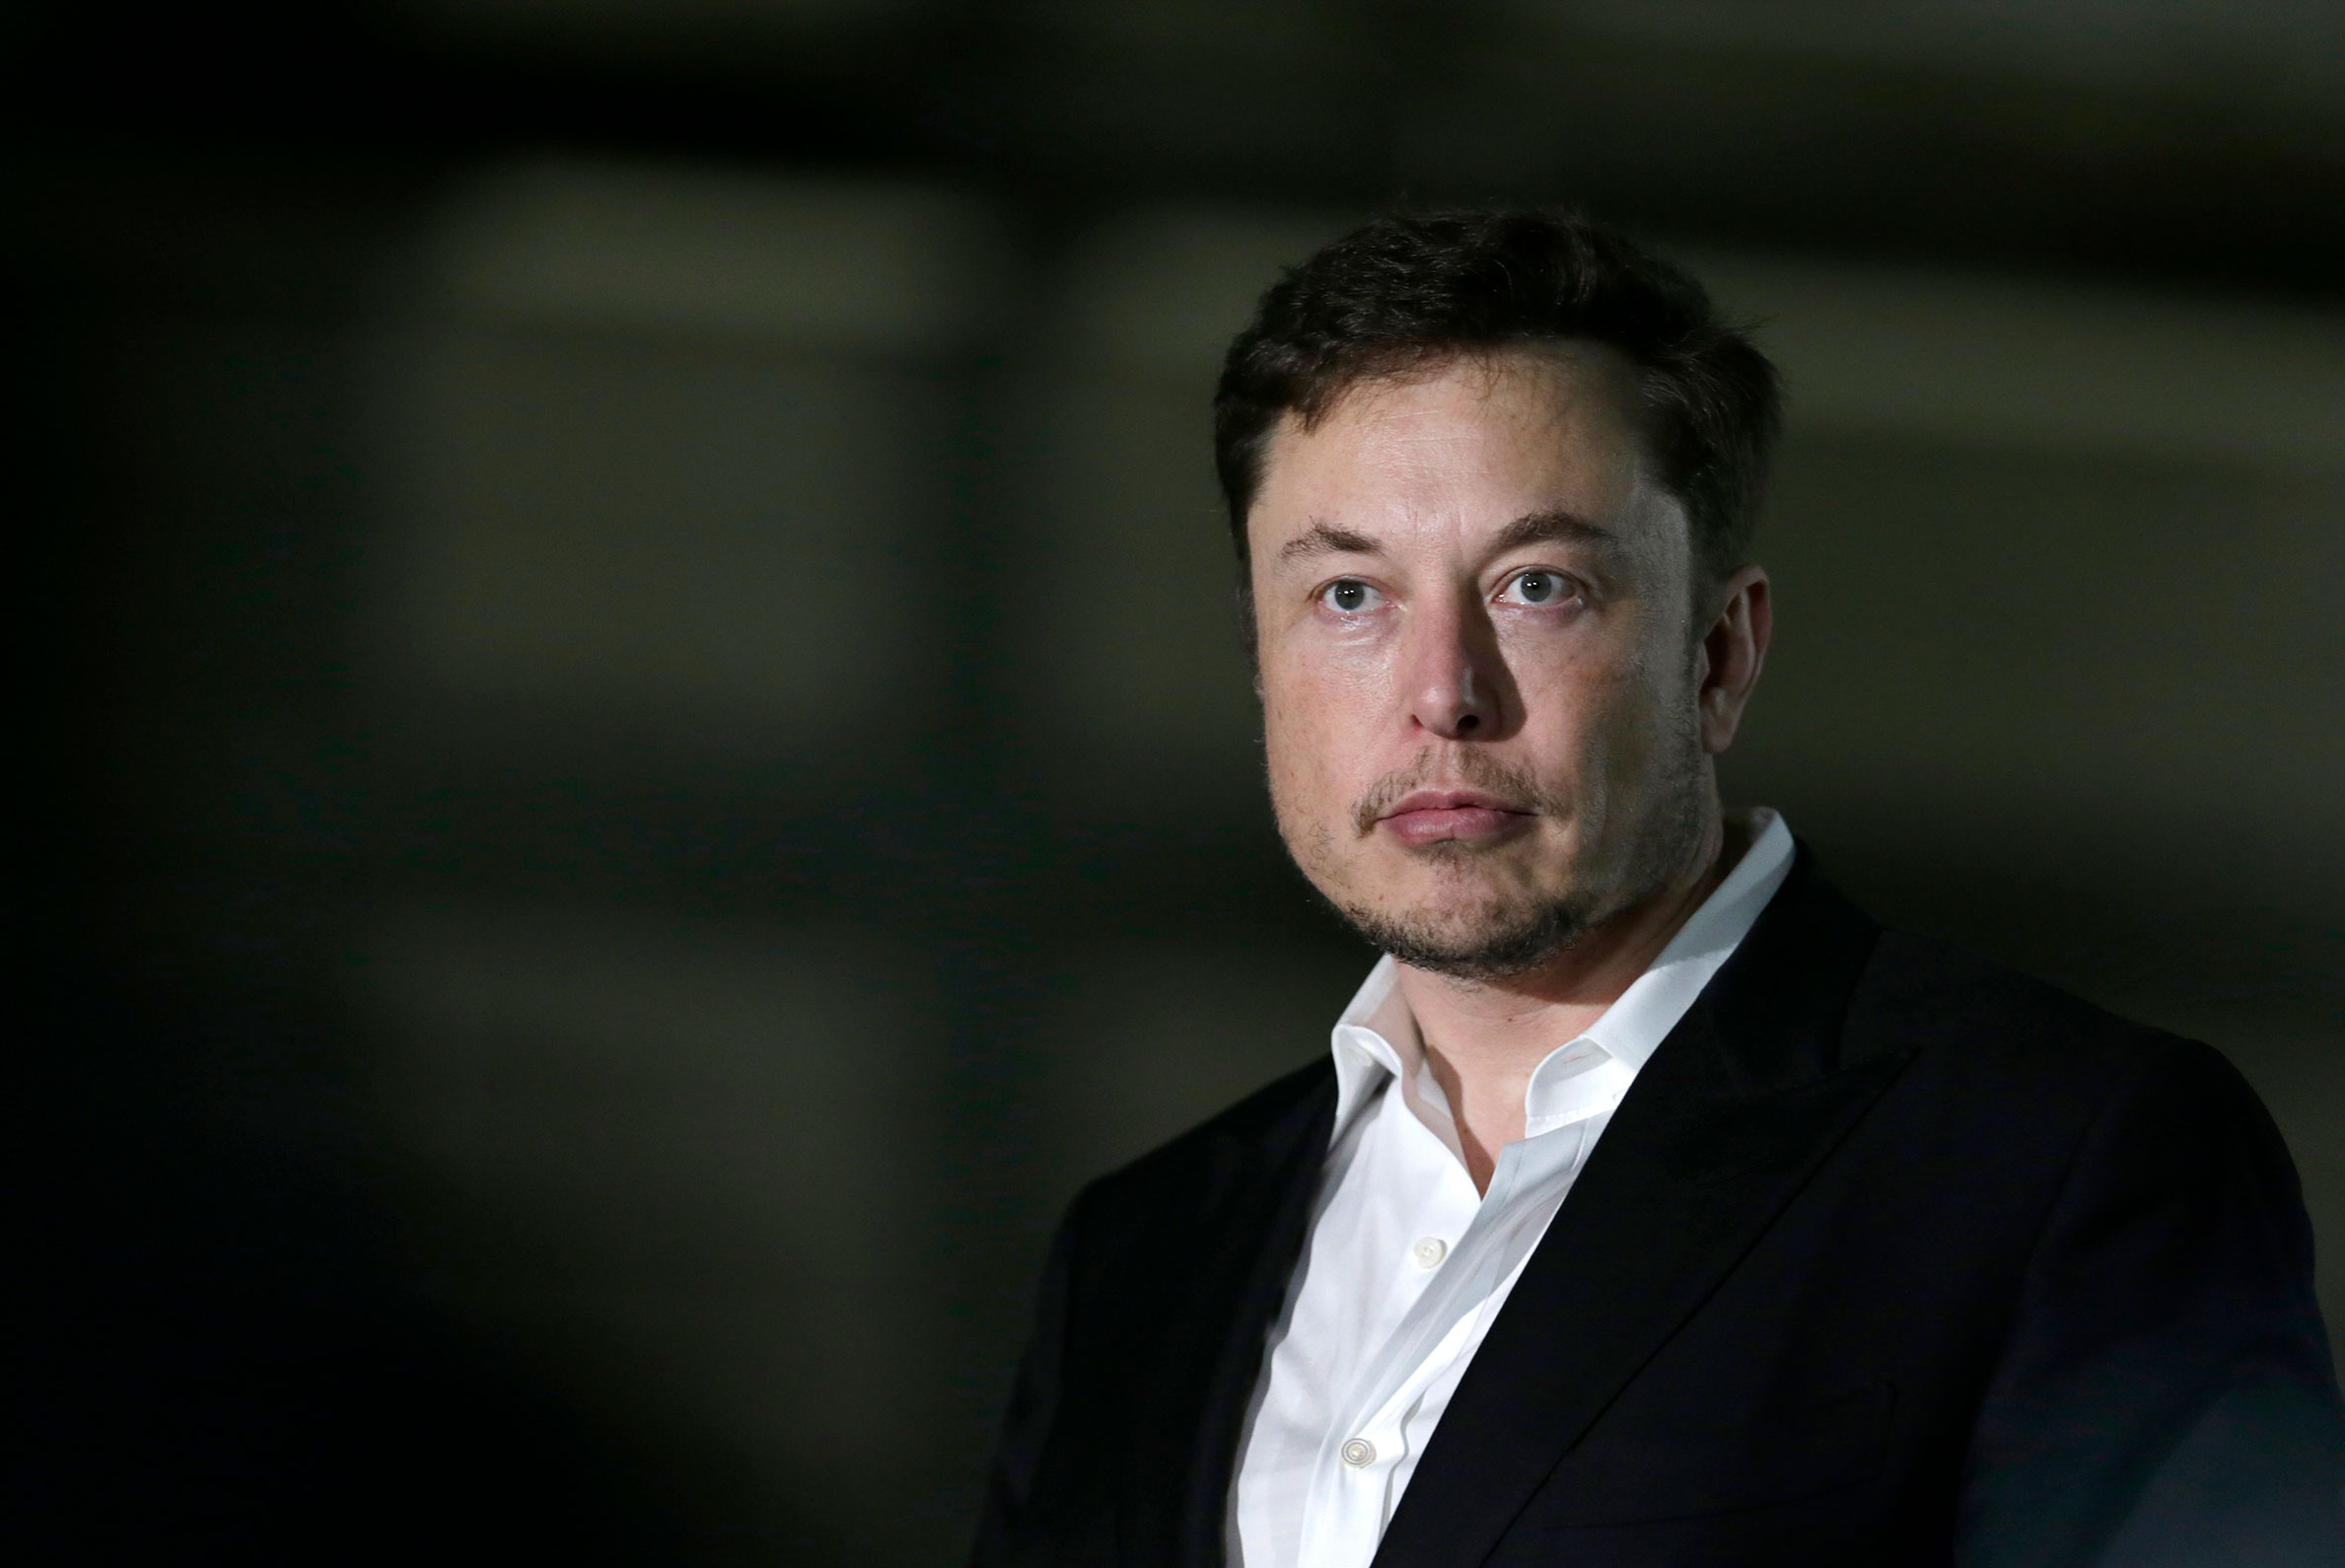 Musk’s new lawyer fights ‘pedo guy’ defamation lawsuit claims, questions motive